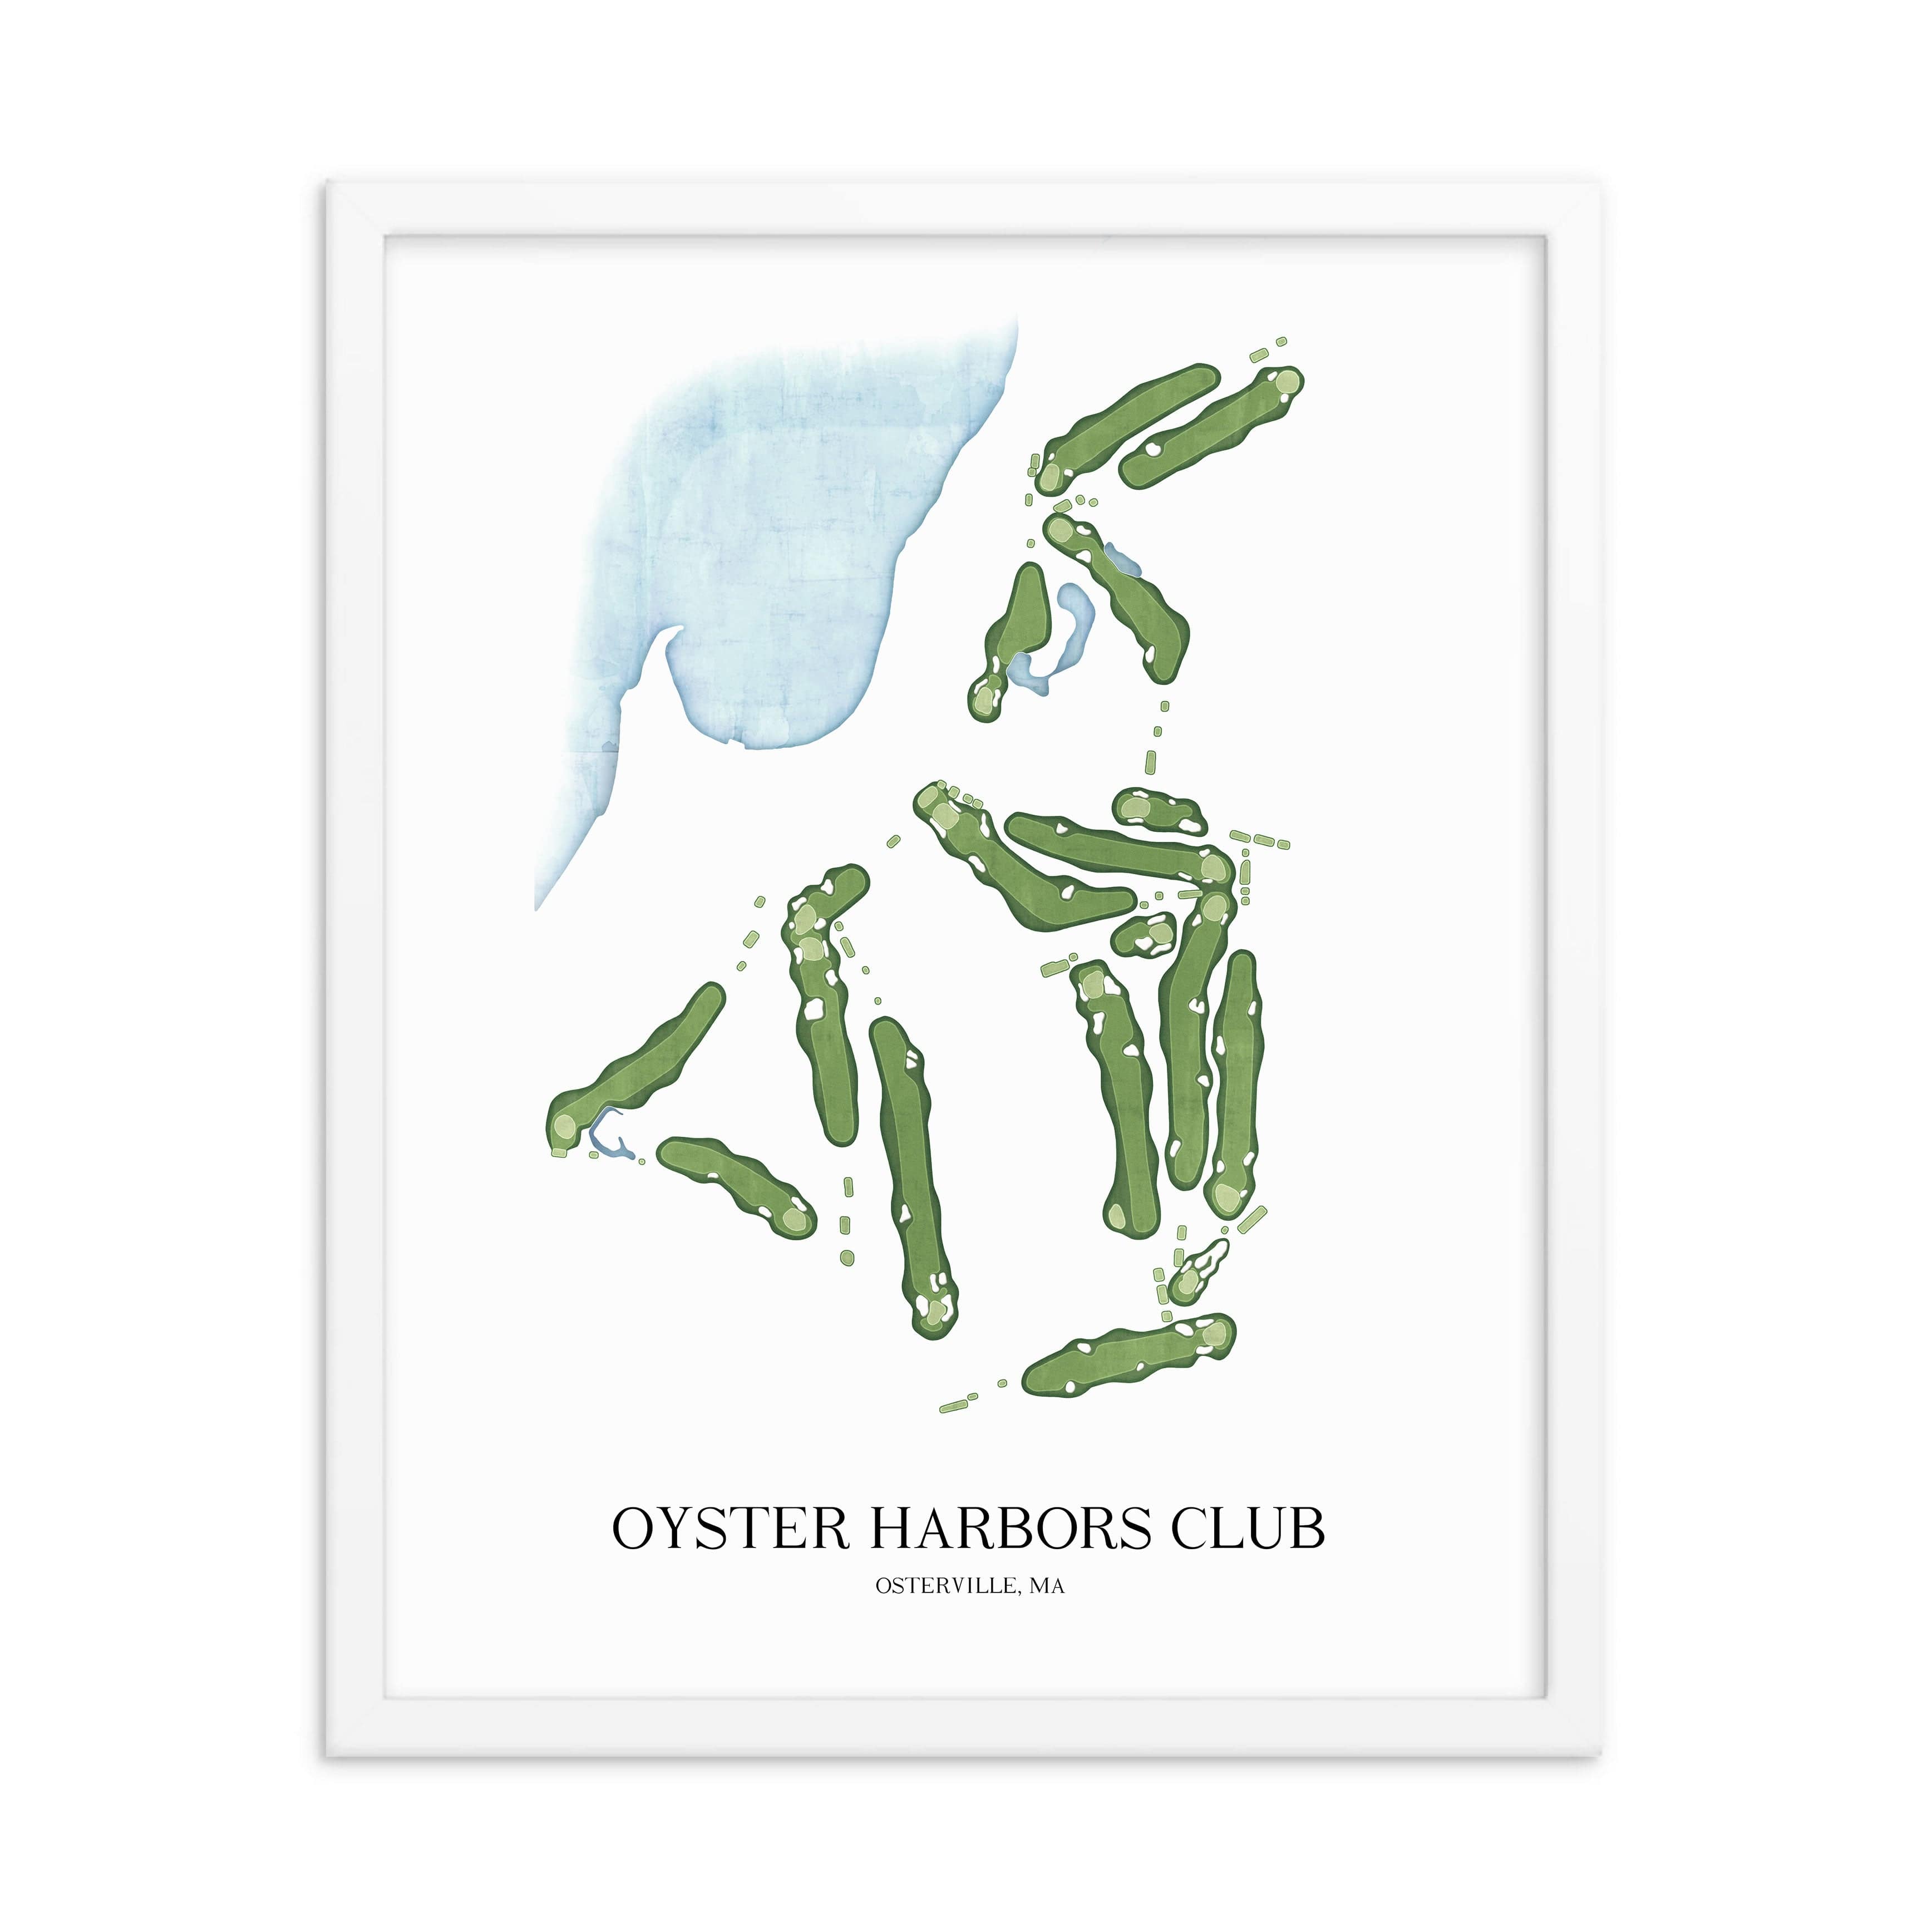 The 19th Hole Golf Shop - Golf Course Prints -  Oyster Harbors Club Golf Course Map